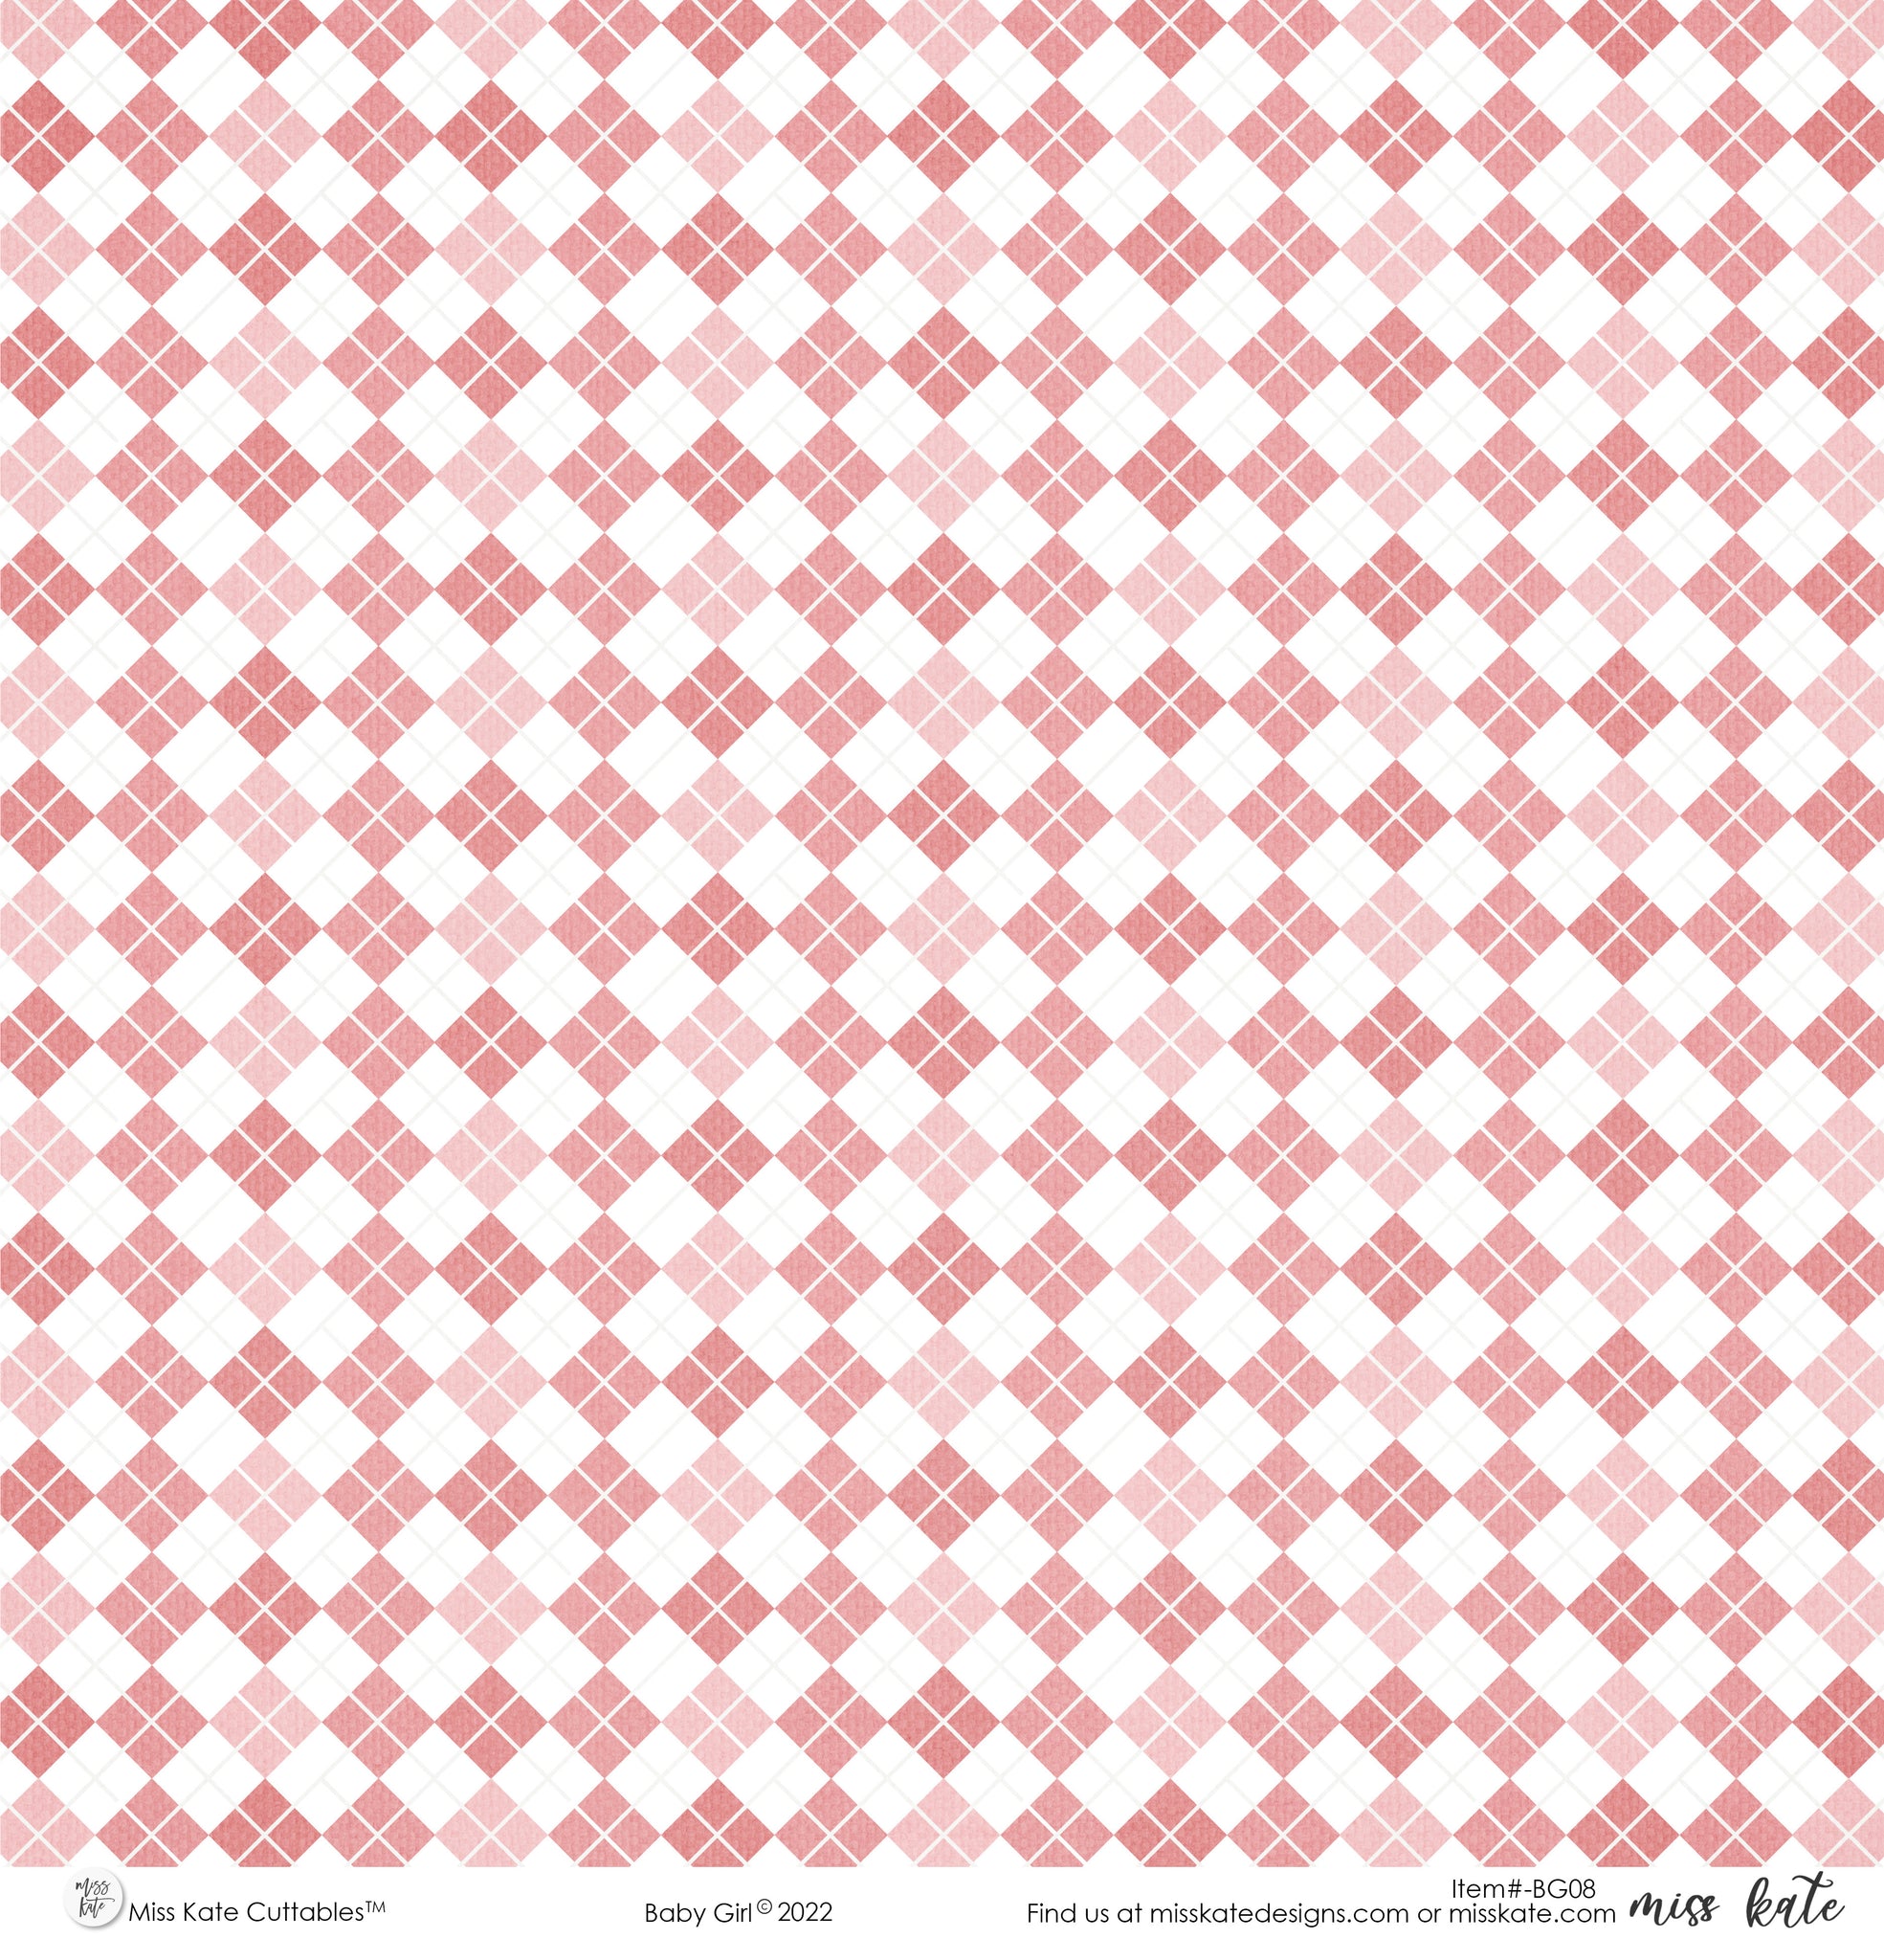 Baby Girl Scrapbook Paper Pad: Pink and Mint 20 Patterned Double Sided Sheets. 8.5 x 11 Flowers, Polka Dots, Gingham, Stripes, Hearts, Rainbow